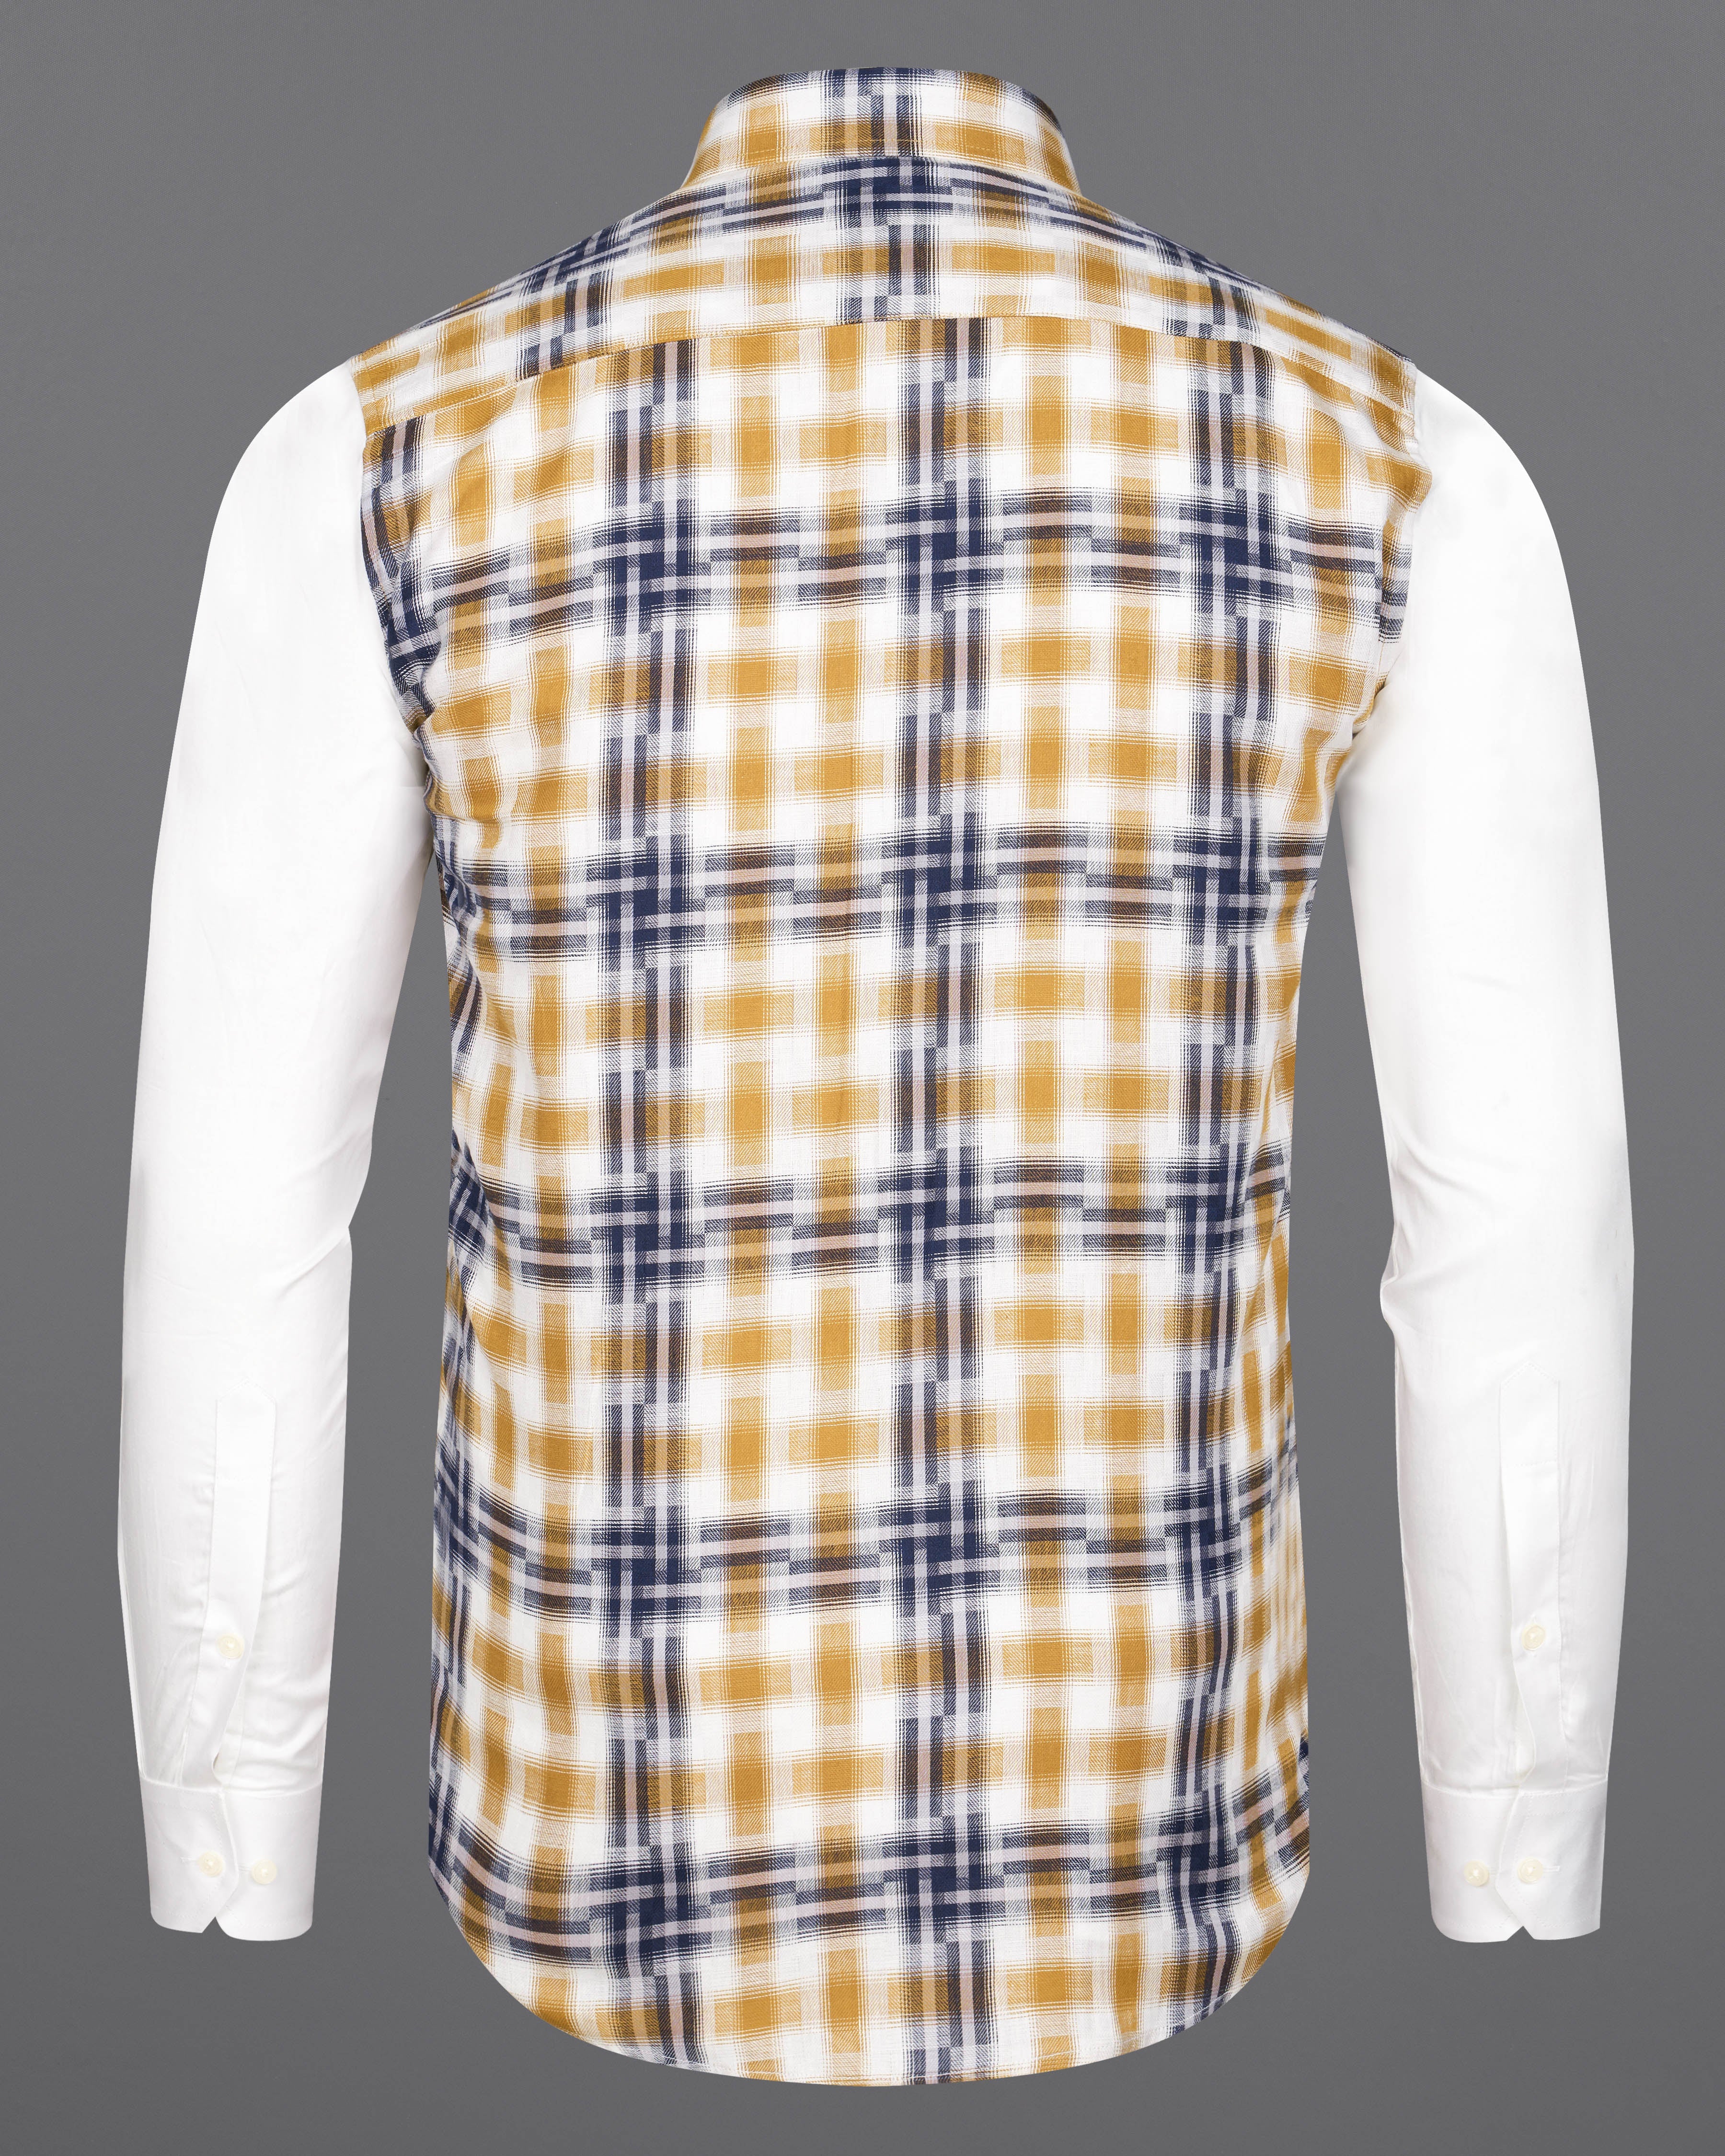 Bright White with Driftwood Brown and Firefly Blue Plaid Super Soft Premium Cotton Designer Shirt 6650-D5-E038-38,6650-D5-E038-H-38,6650-D5-E038-39,6650-D5-E038-H-39,6650-D5-E038-40,6650-D5-E038-H-40,6650-D5-E038-42,6650-D5-E038-H-42,6650-D5-E038-44,6650-D5-E038-H-44,6650-D5-E038-46,6650-D5-E038-H-46,6650-D5-E038-48,6650-D5-E038-H-48,6650-D5-E038-50,6650-D5-E038-H-50,6650-D5-E038-52,6650-D5-E038-H-52